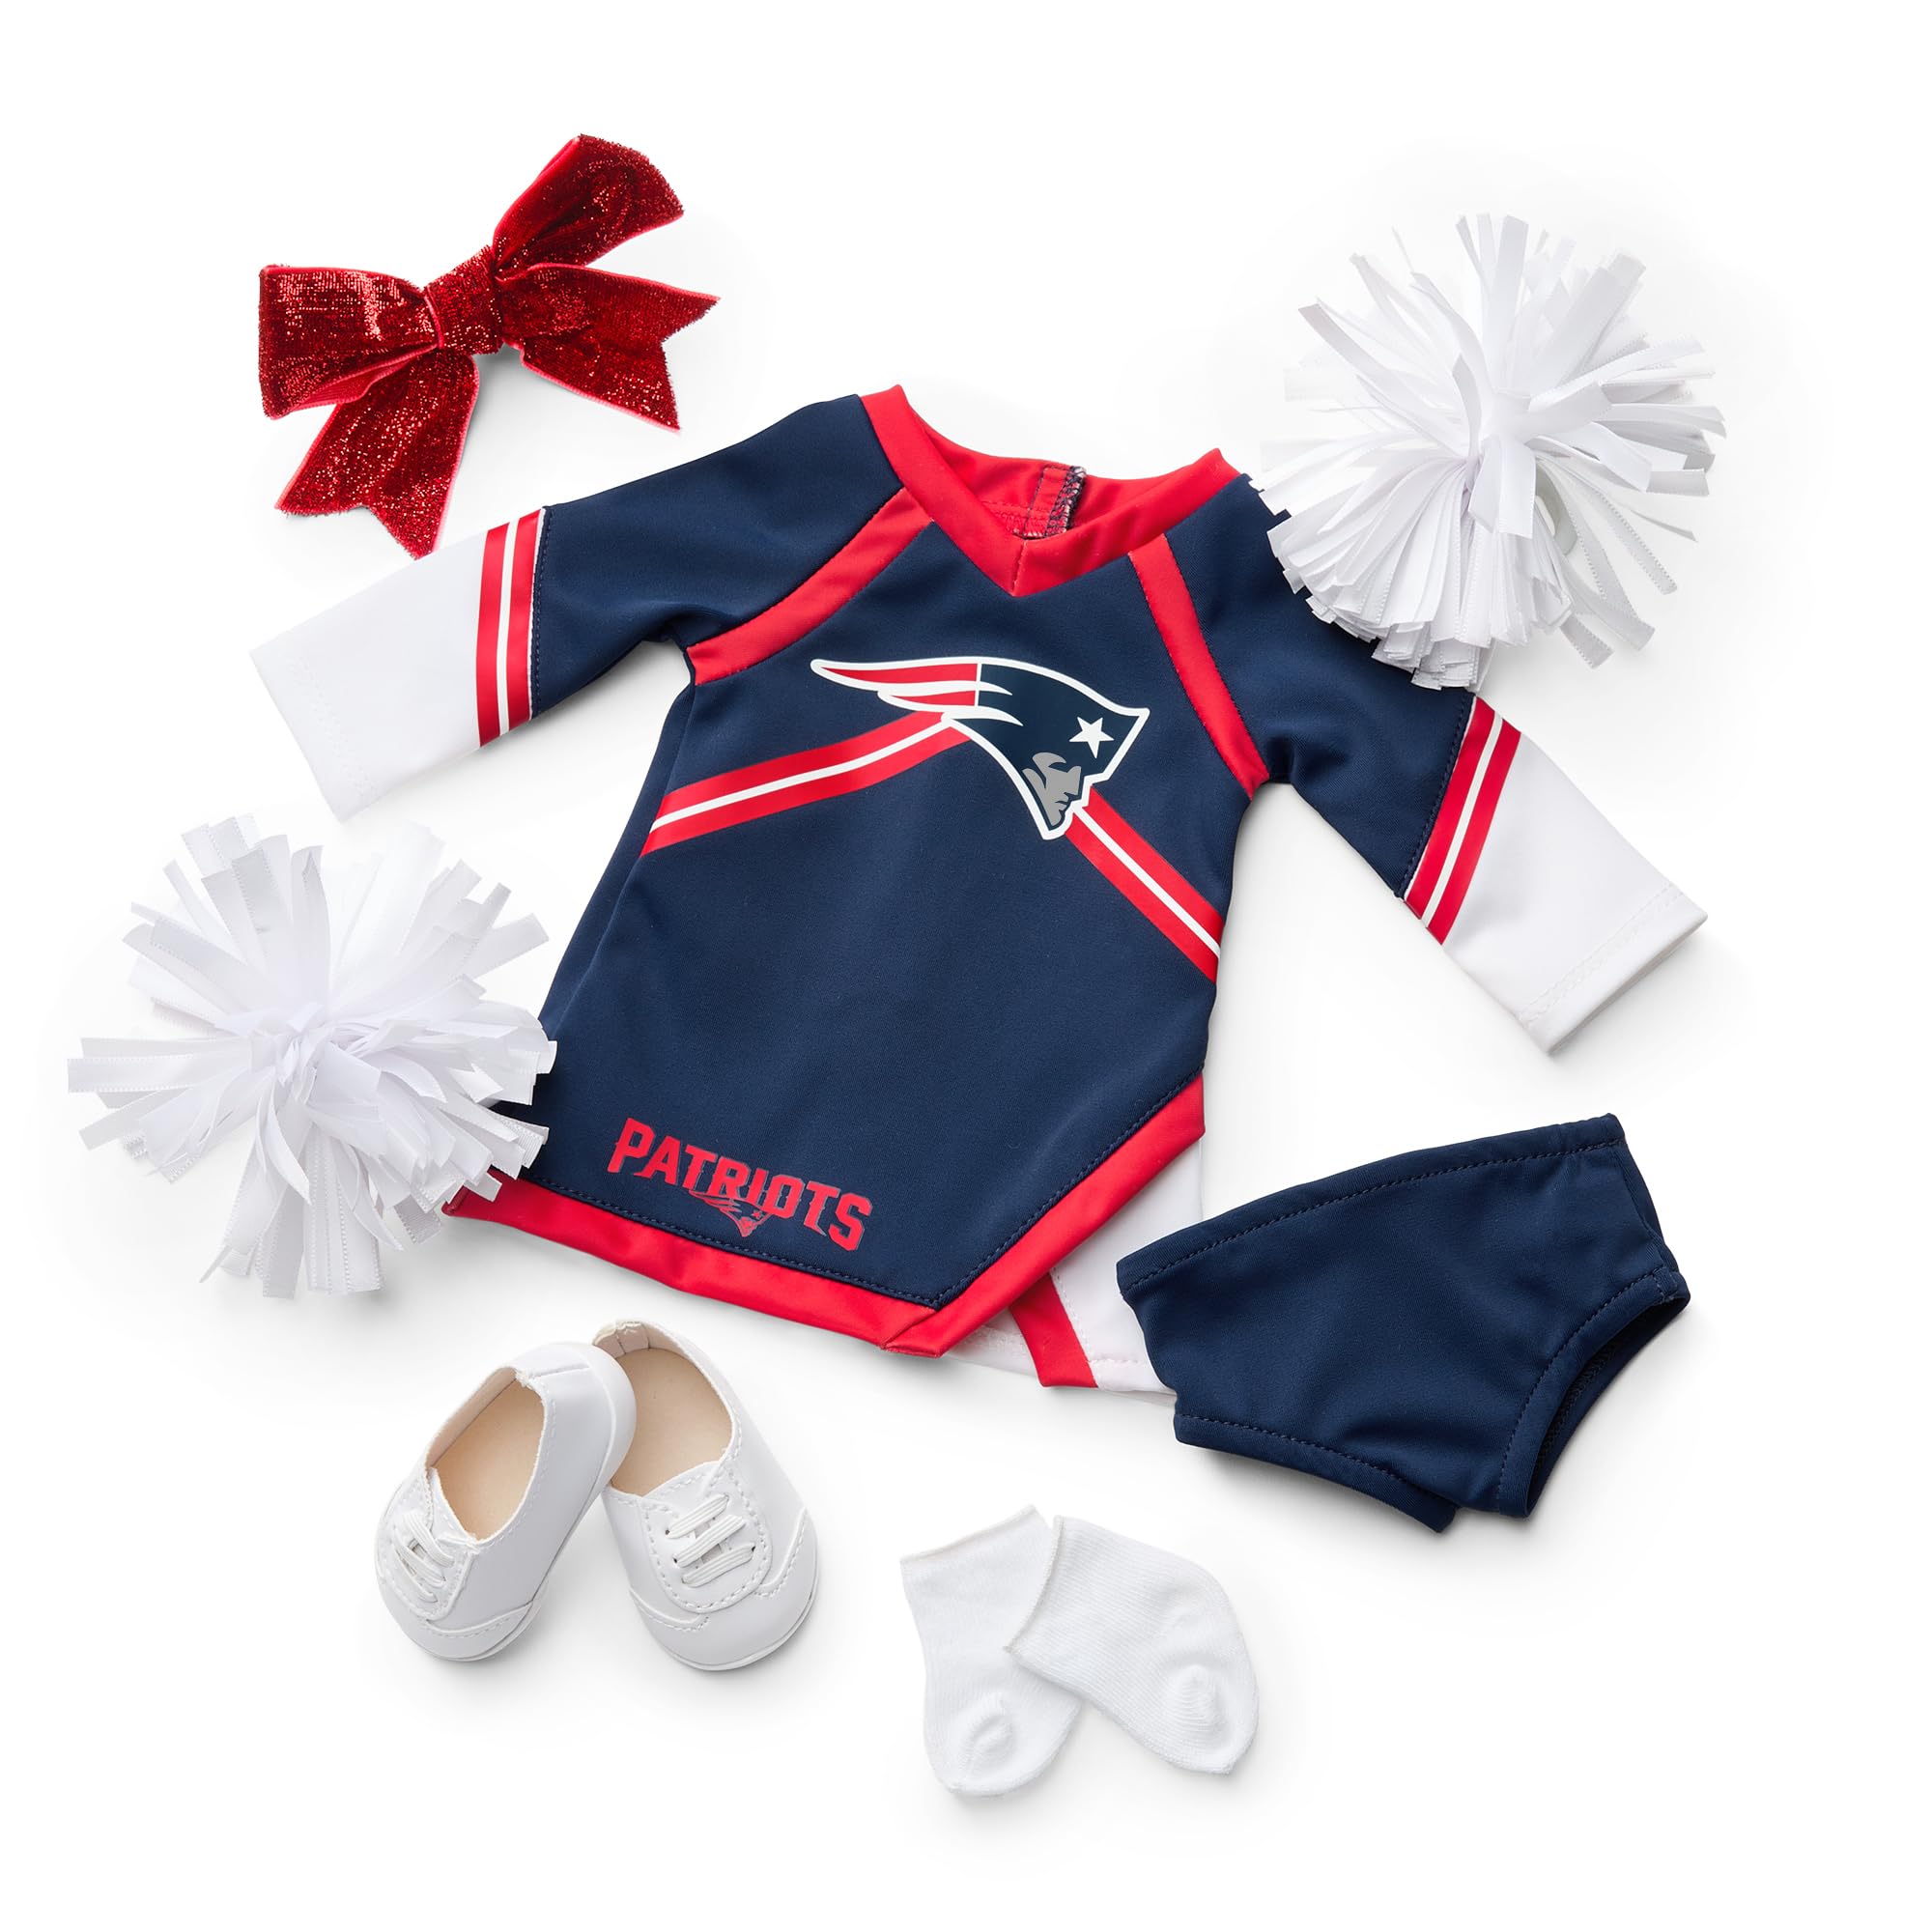 American Girl New England Patriots Cheer Uniform 18 inch Doll Clothes with Pom Poms, Navy and Red, 5 pcs, Ages 6+